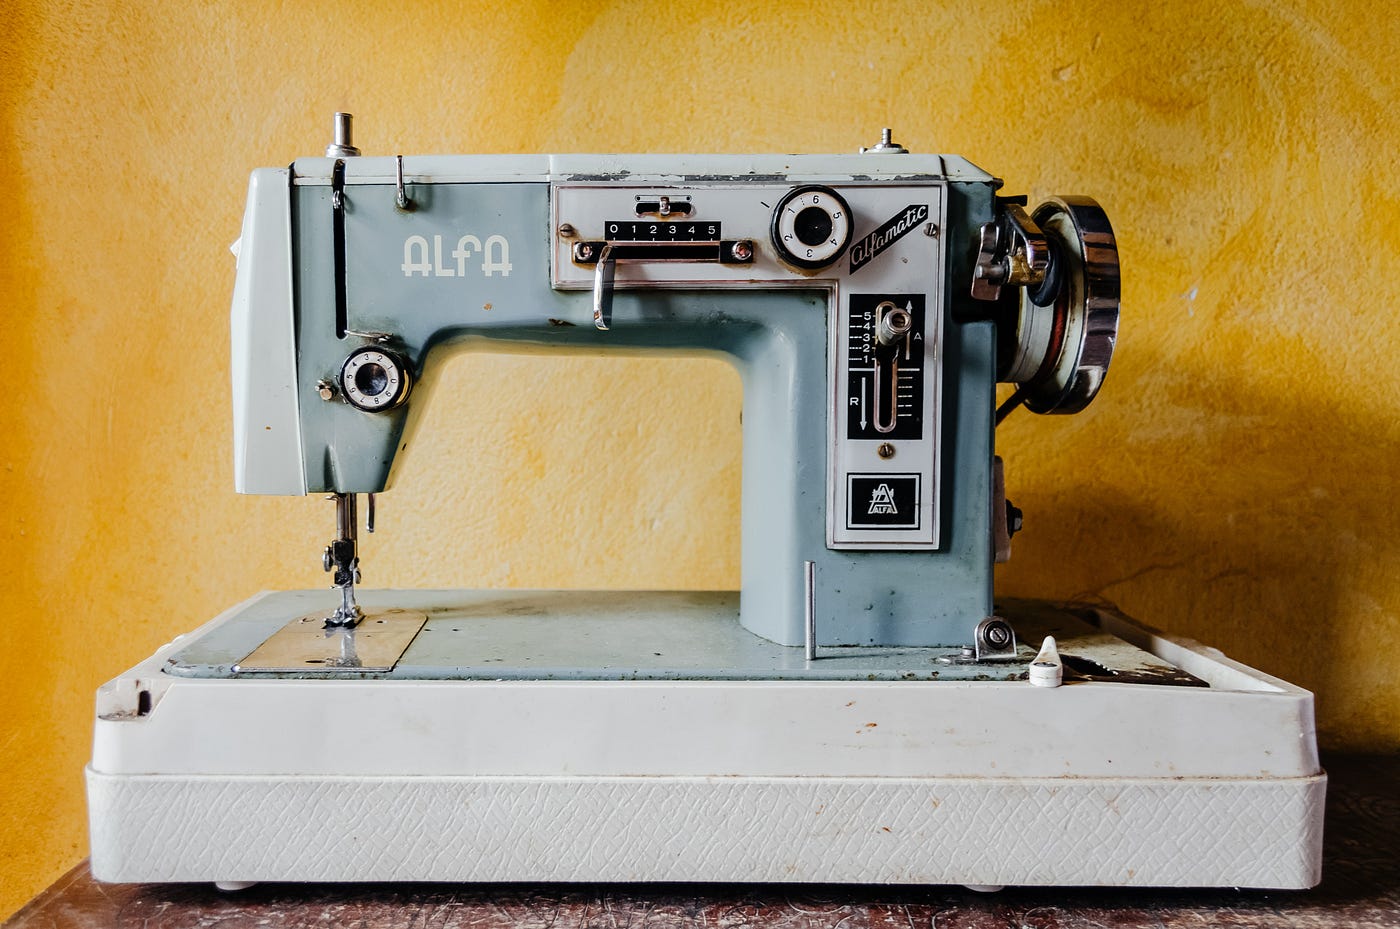 The Complete Guide to Mechanical Sewing Machines | by Rob Miller | Medium